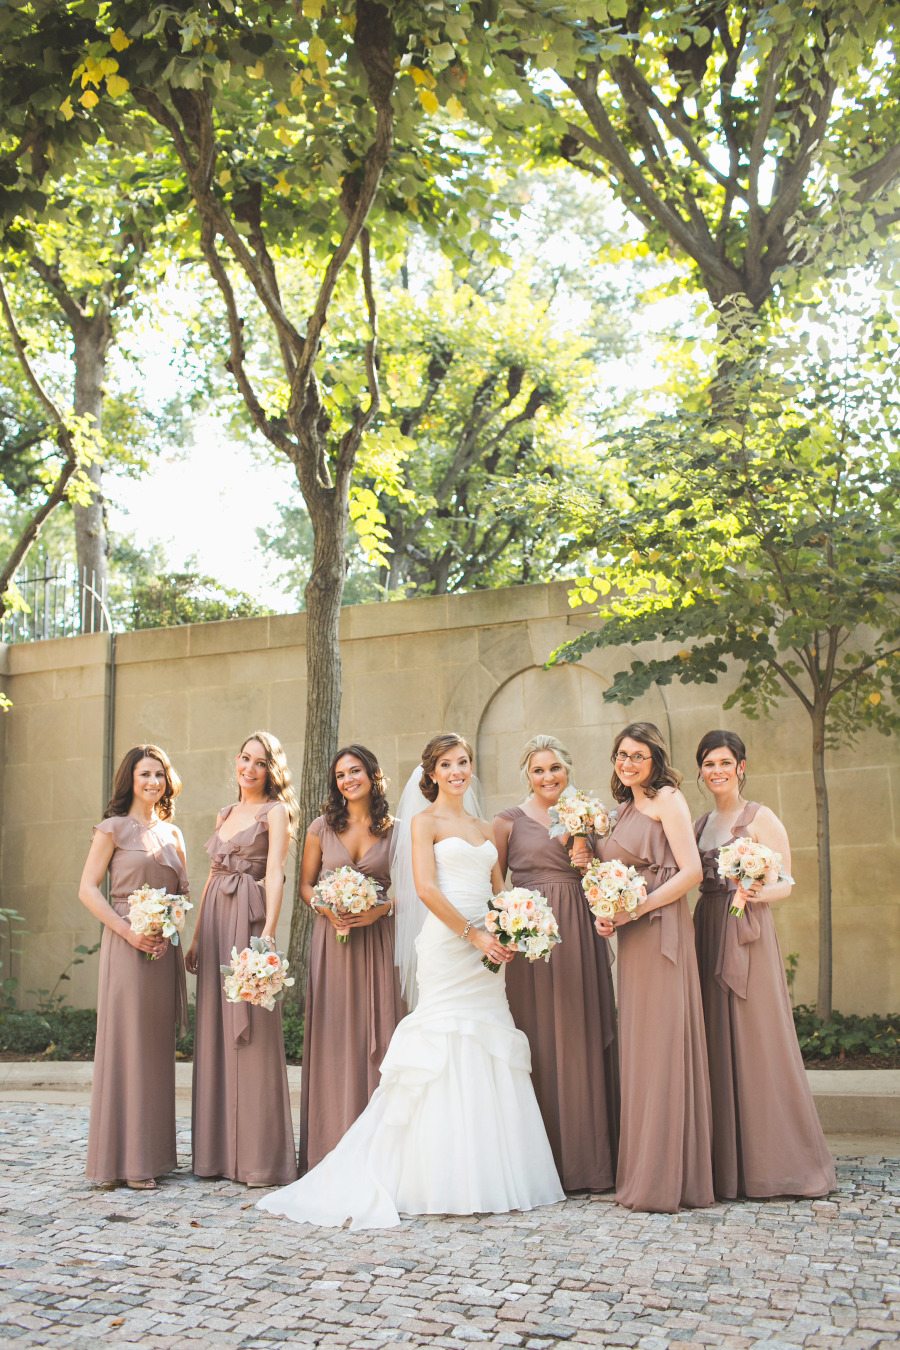 Team Wedding Blog 5 Fall Colors for Your Bridesmaids to Wear